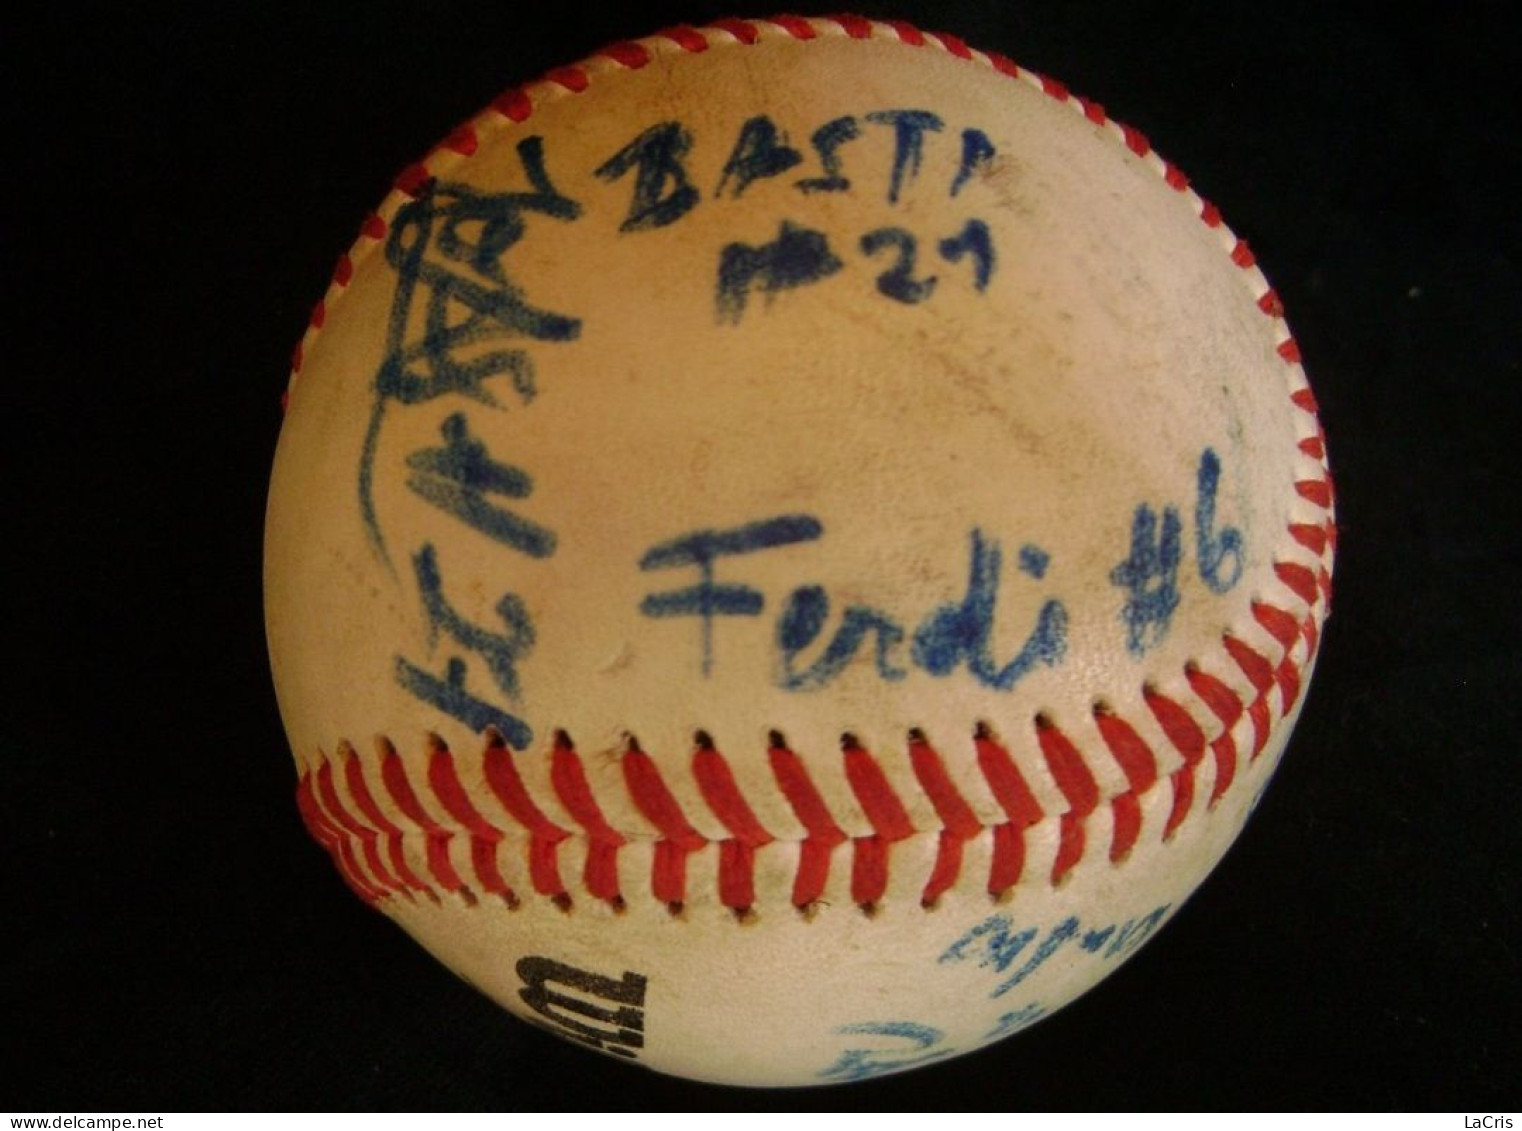 Old American Hand-Signed 11 Baseball Players - Authographs